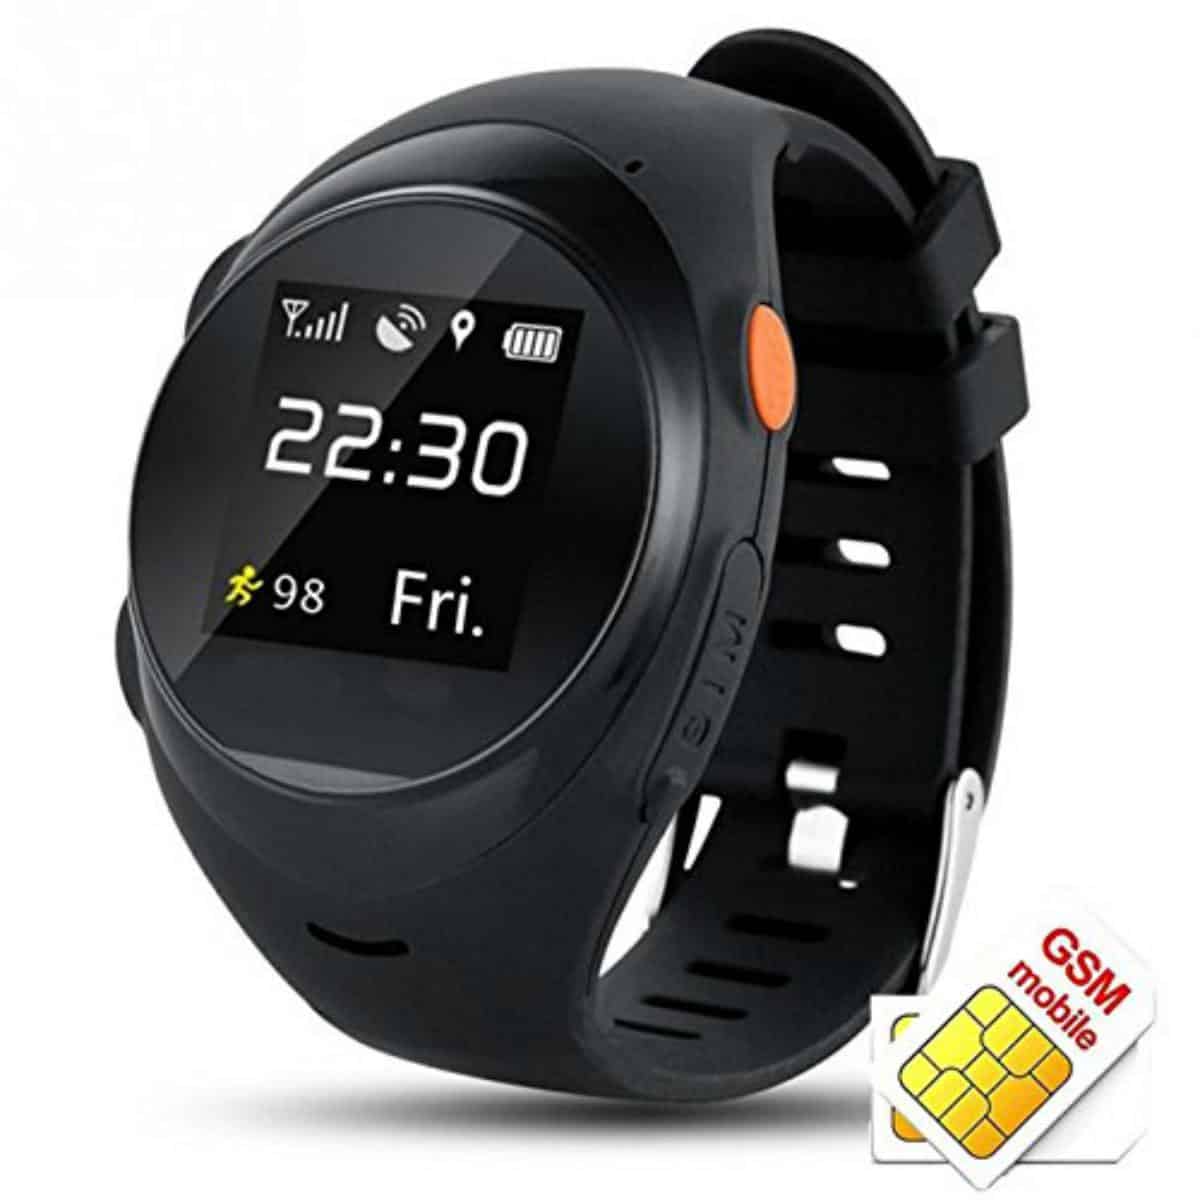 Anti-Lost Smart Watch | Best GPS-Enabled Kids Watches | Child Safety For The Modern Family